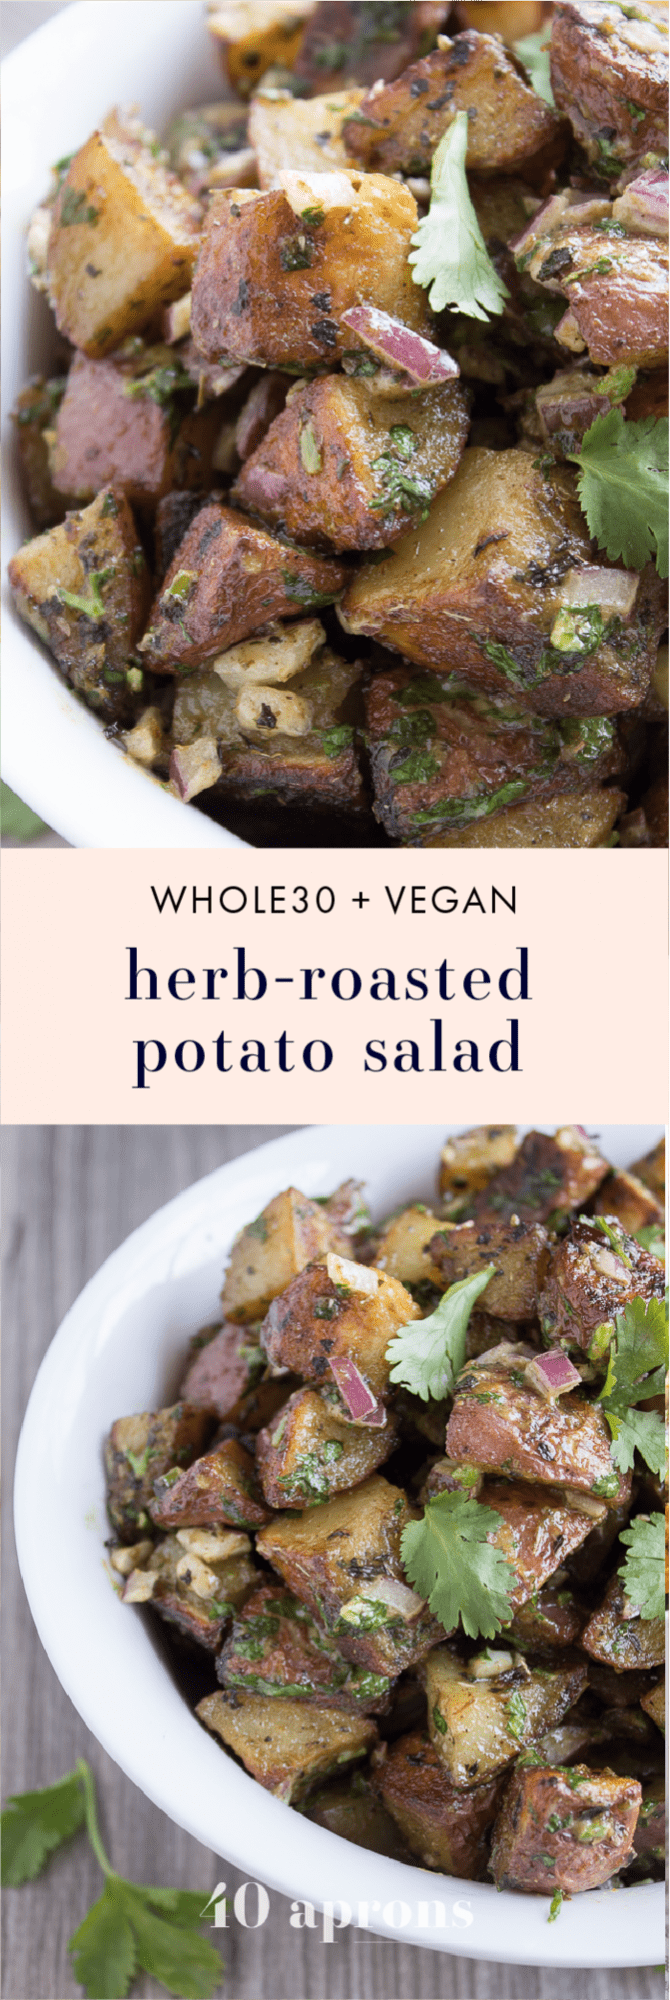 This herb roasted potato salad is absolutely delicious: crispy roasted potatoes, heady dried herbs, and a rich and creamy sauce with fresh herbs and minced red onions. Packed full of flavor, this herb roasted potato salad is destined to become a favorite, both with the family and with your guests! This herb roasted potato salad is also paleo, Whole30-compliant, and vegan friendly. Simply put, it's the best herb roasted potato salad out there.